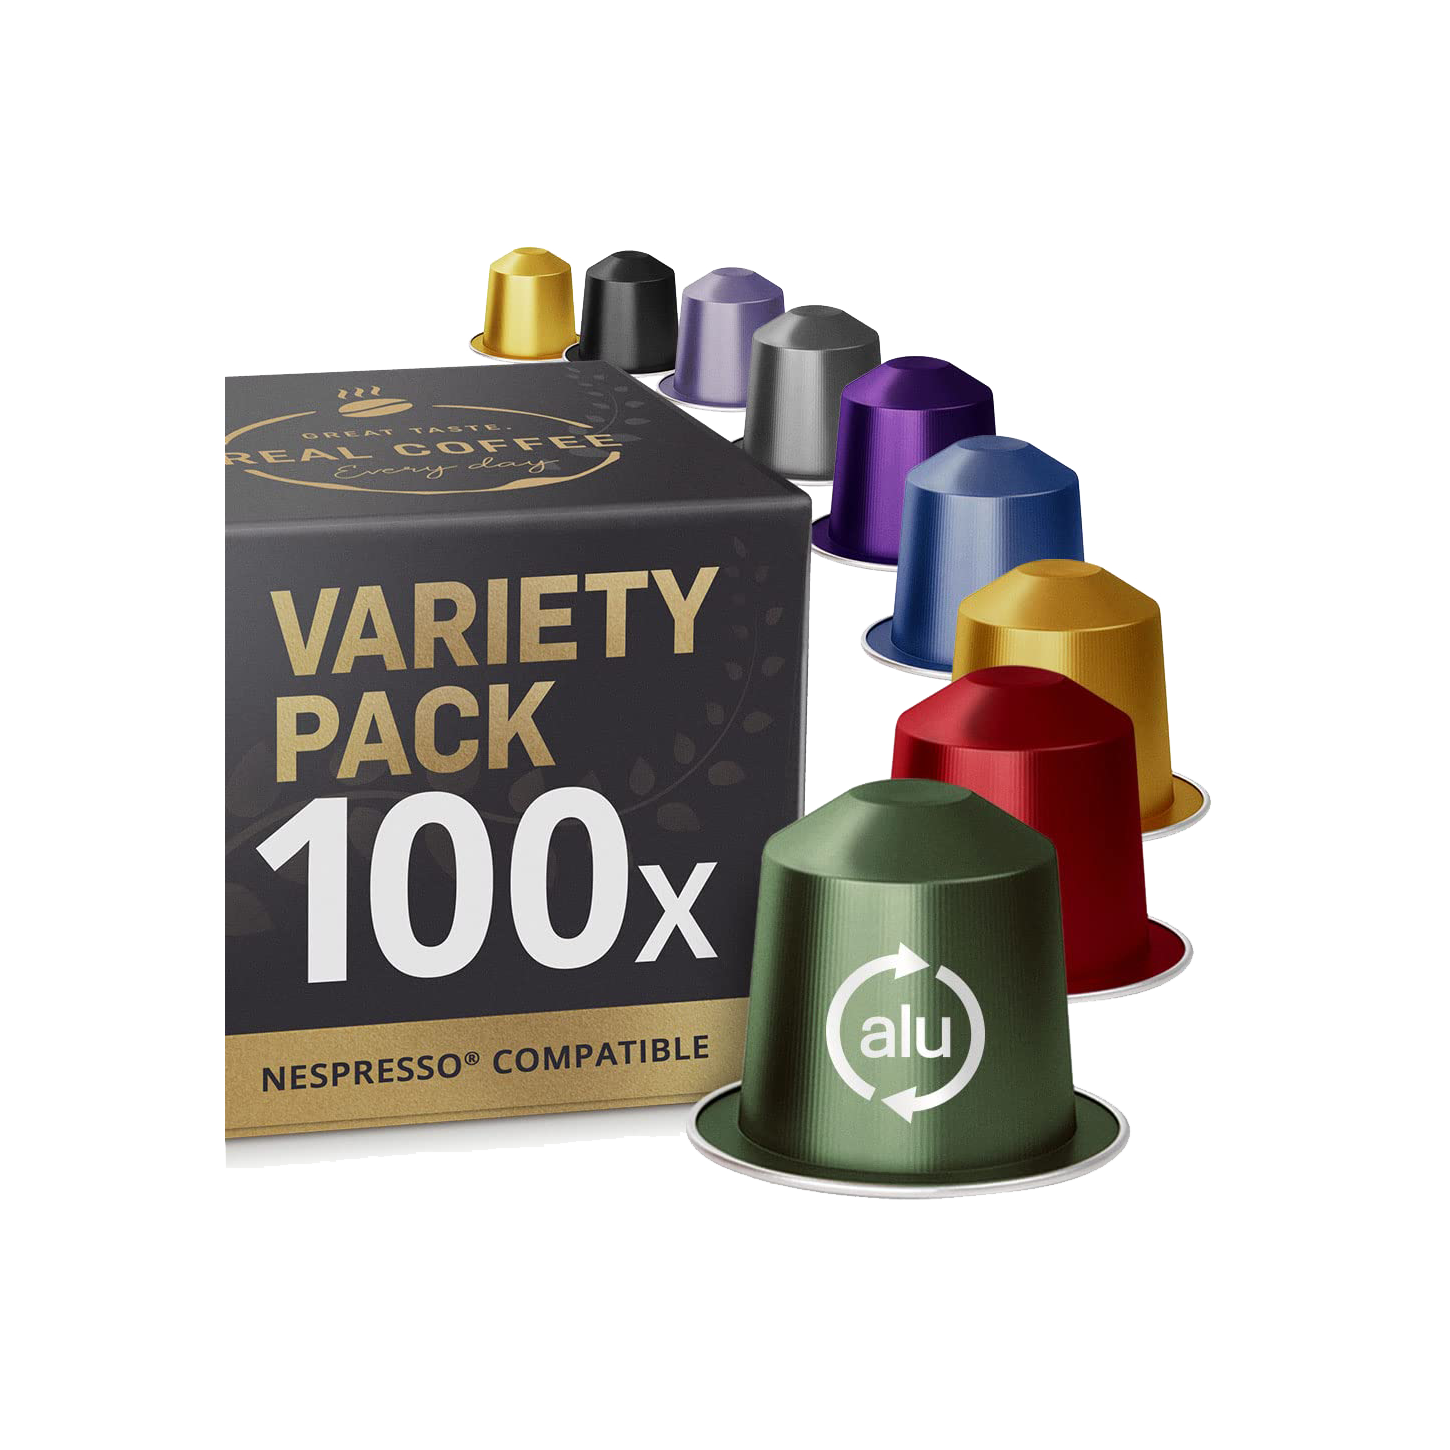 Nespresso Compatible Pods Mixed Variety (100 Pack)